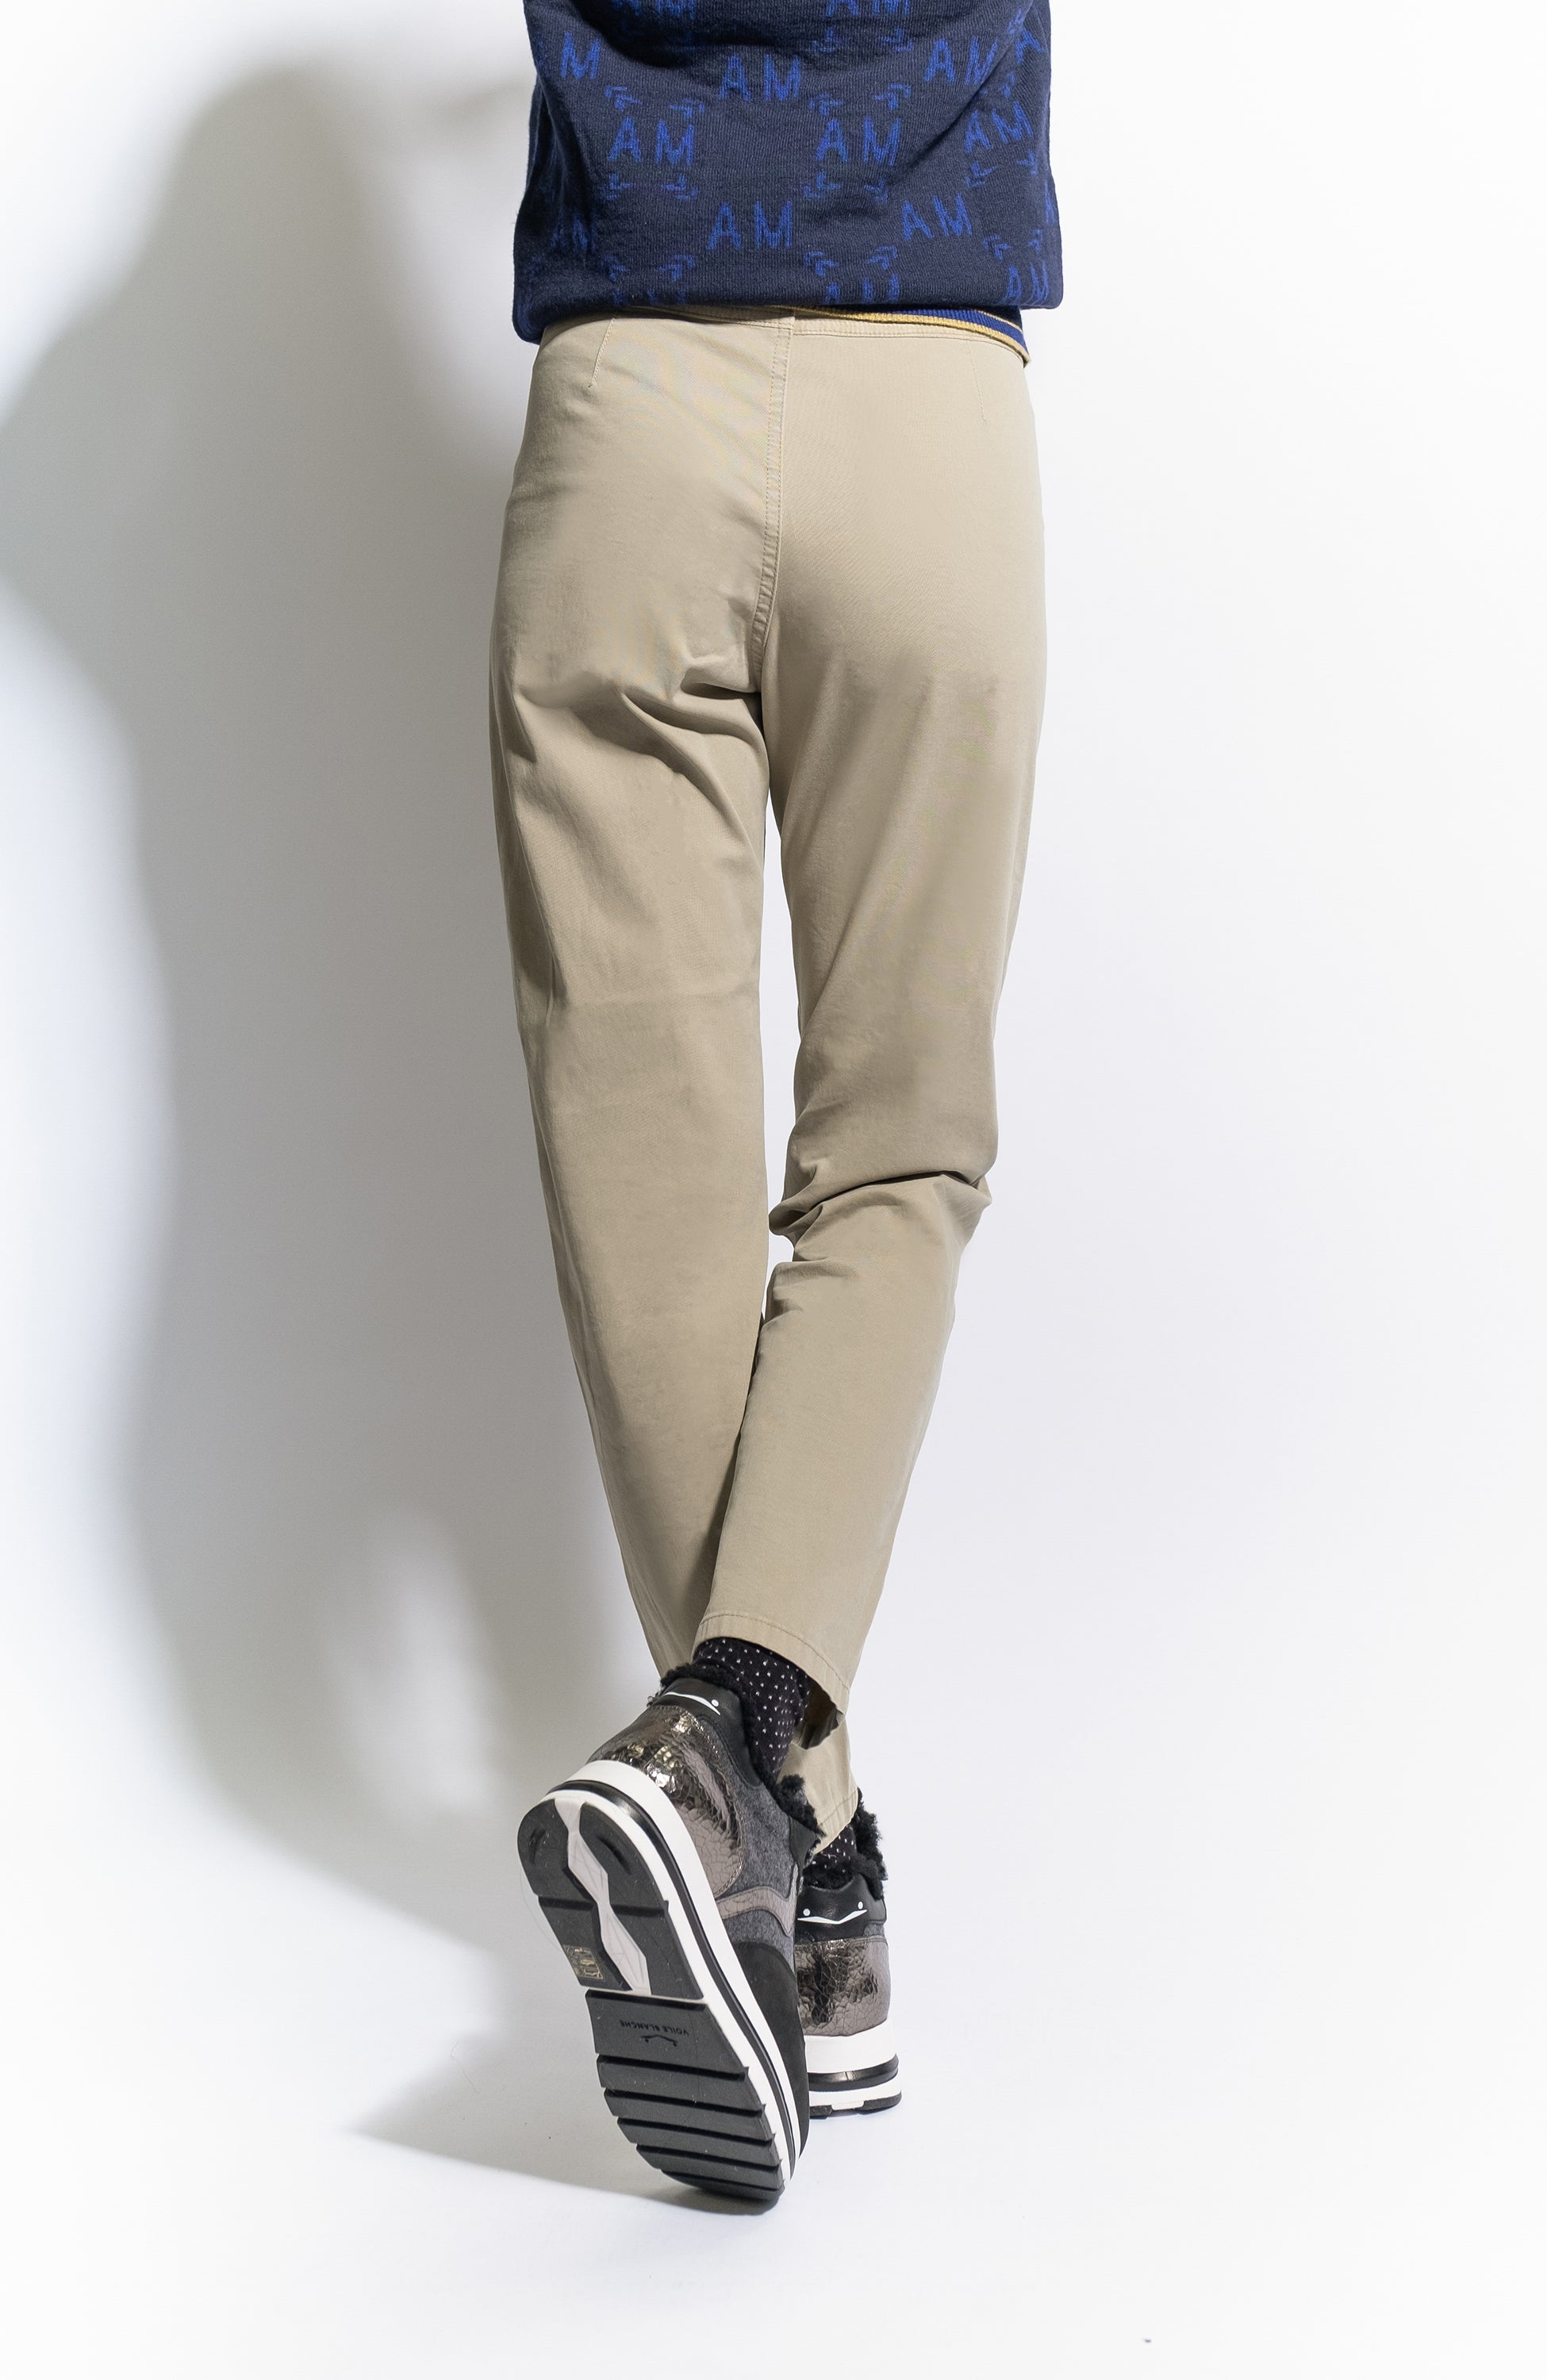 Slouchy cotton trousers